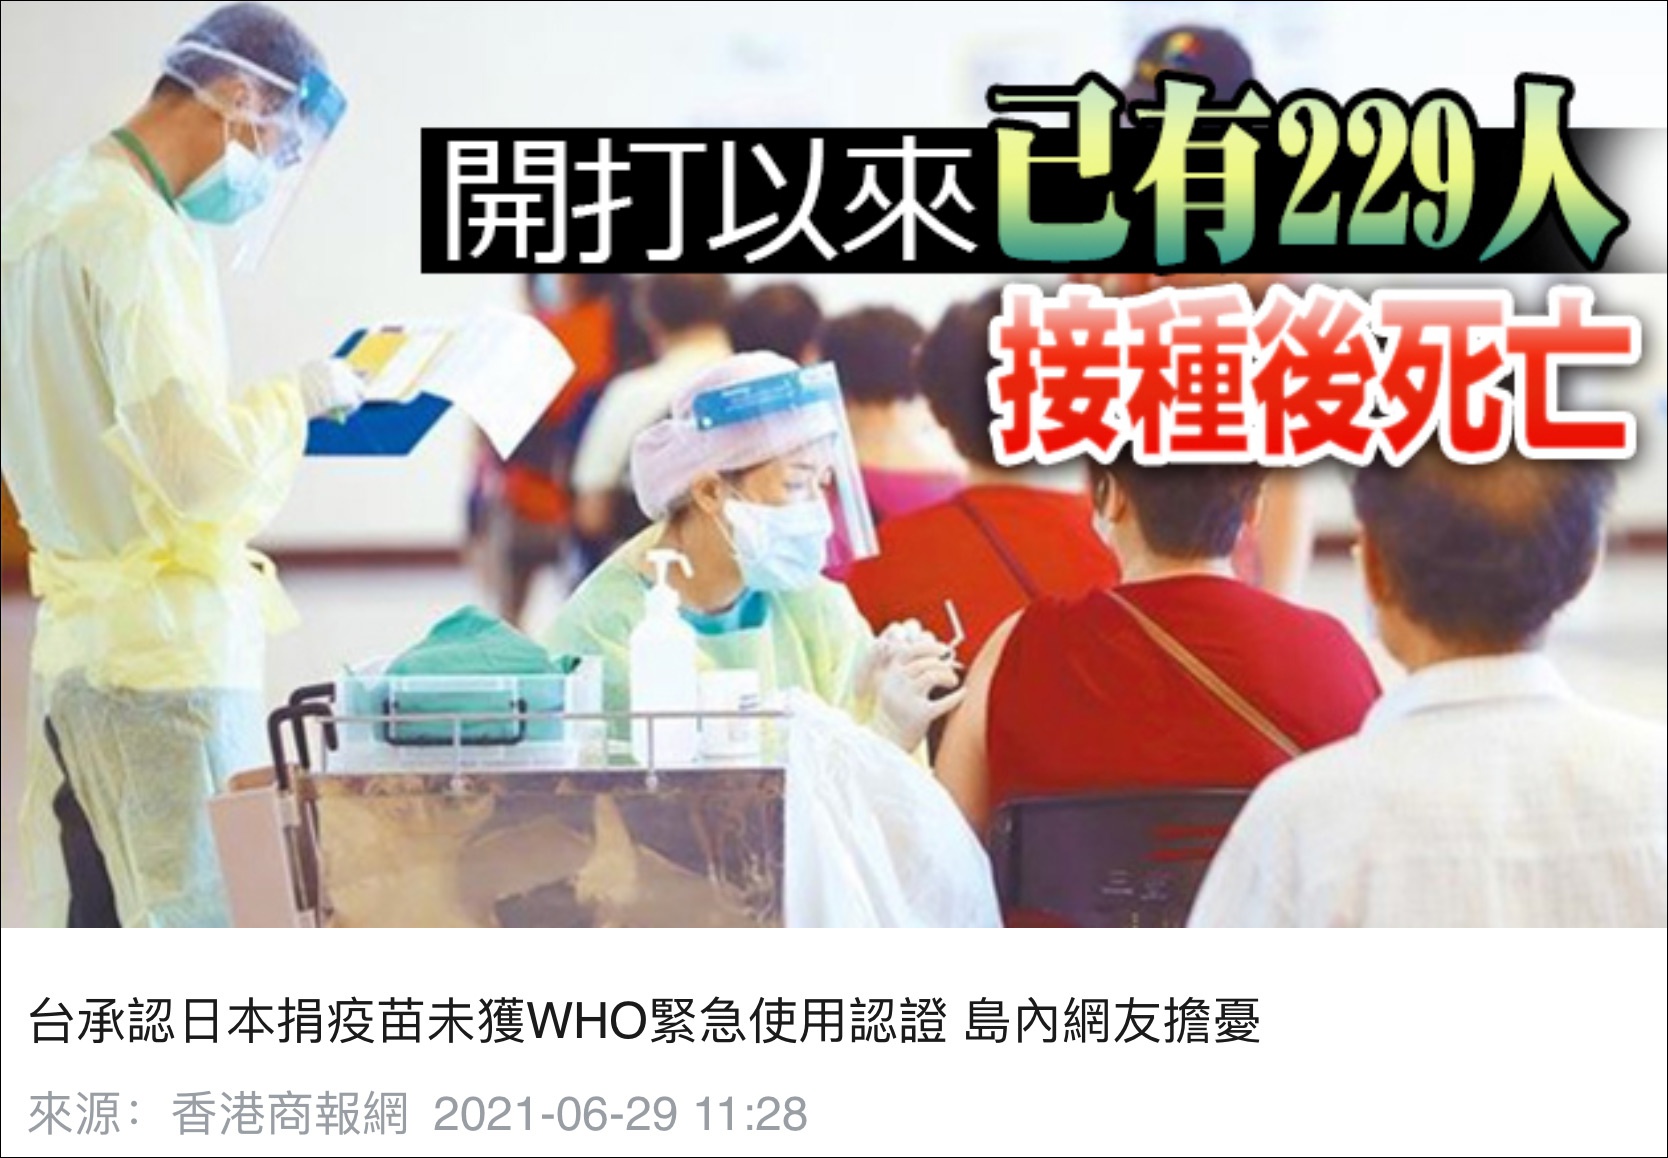 Screenshot of Hong Kong Commercial Daily's report on the 29th